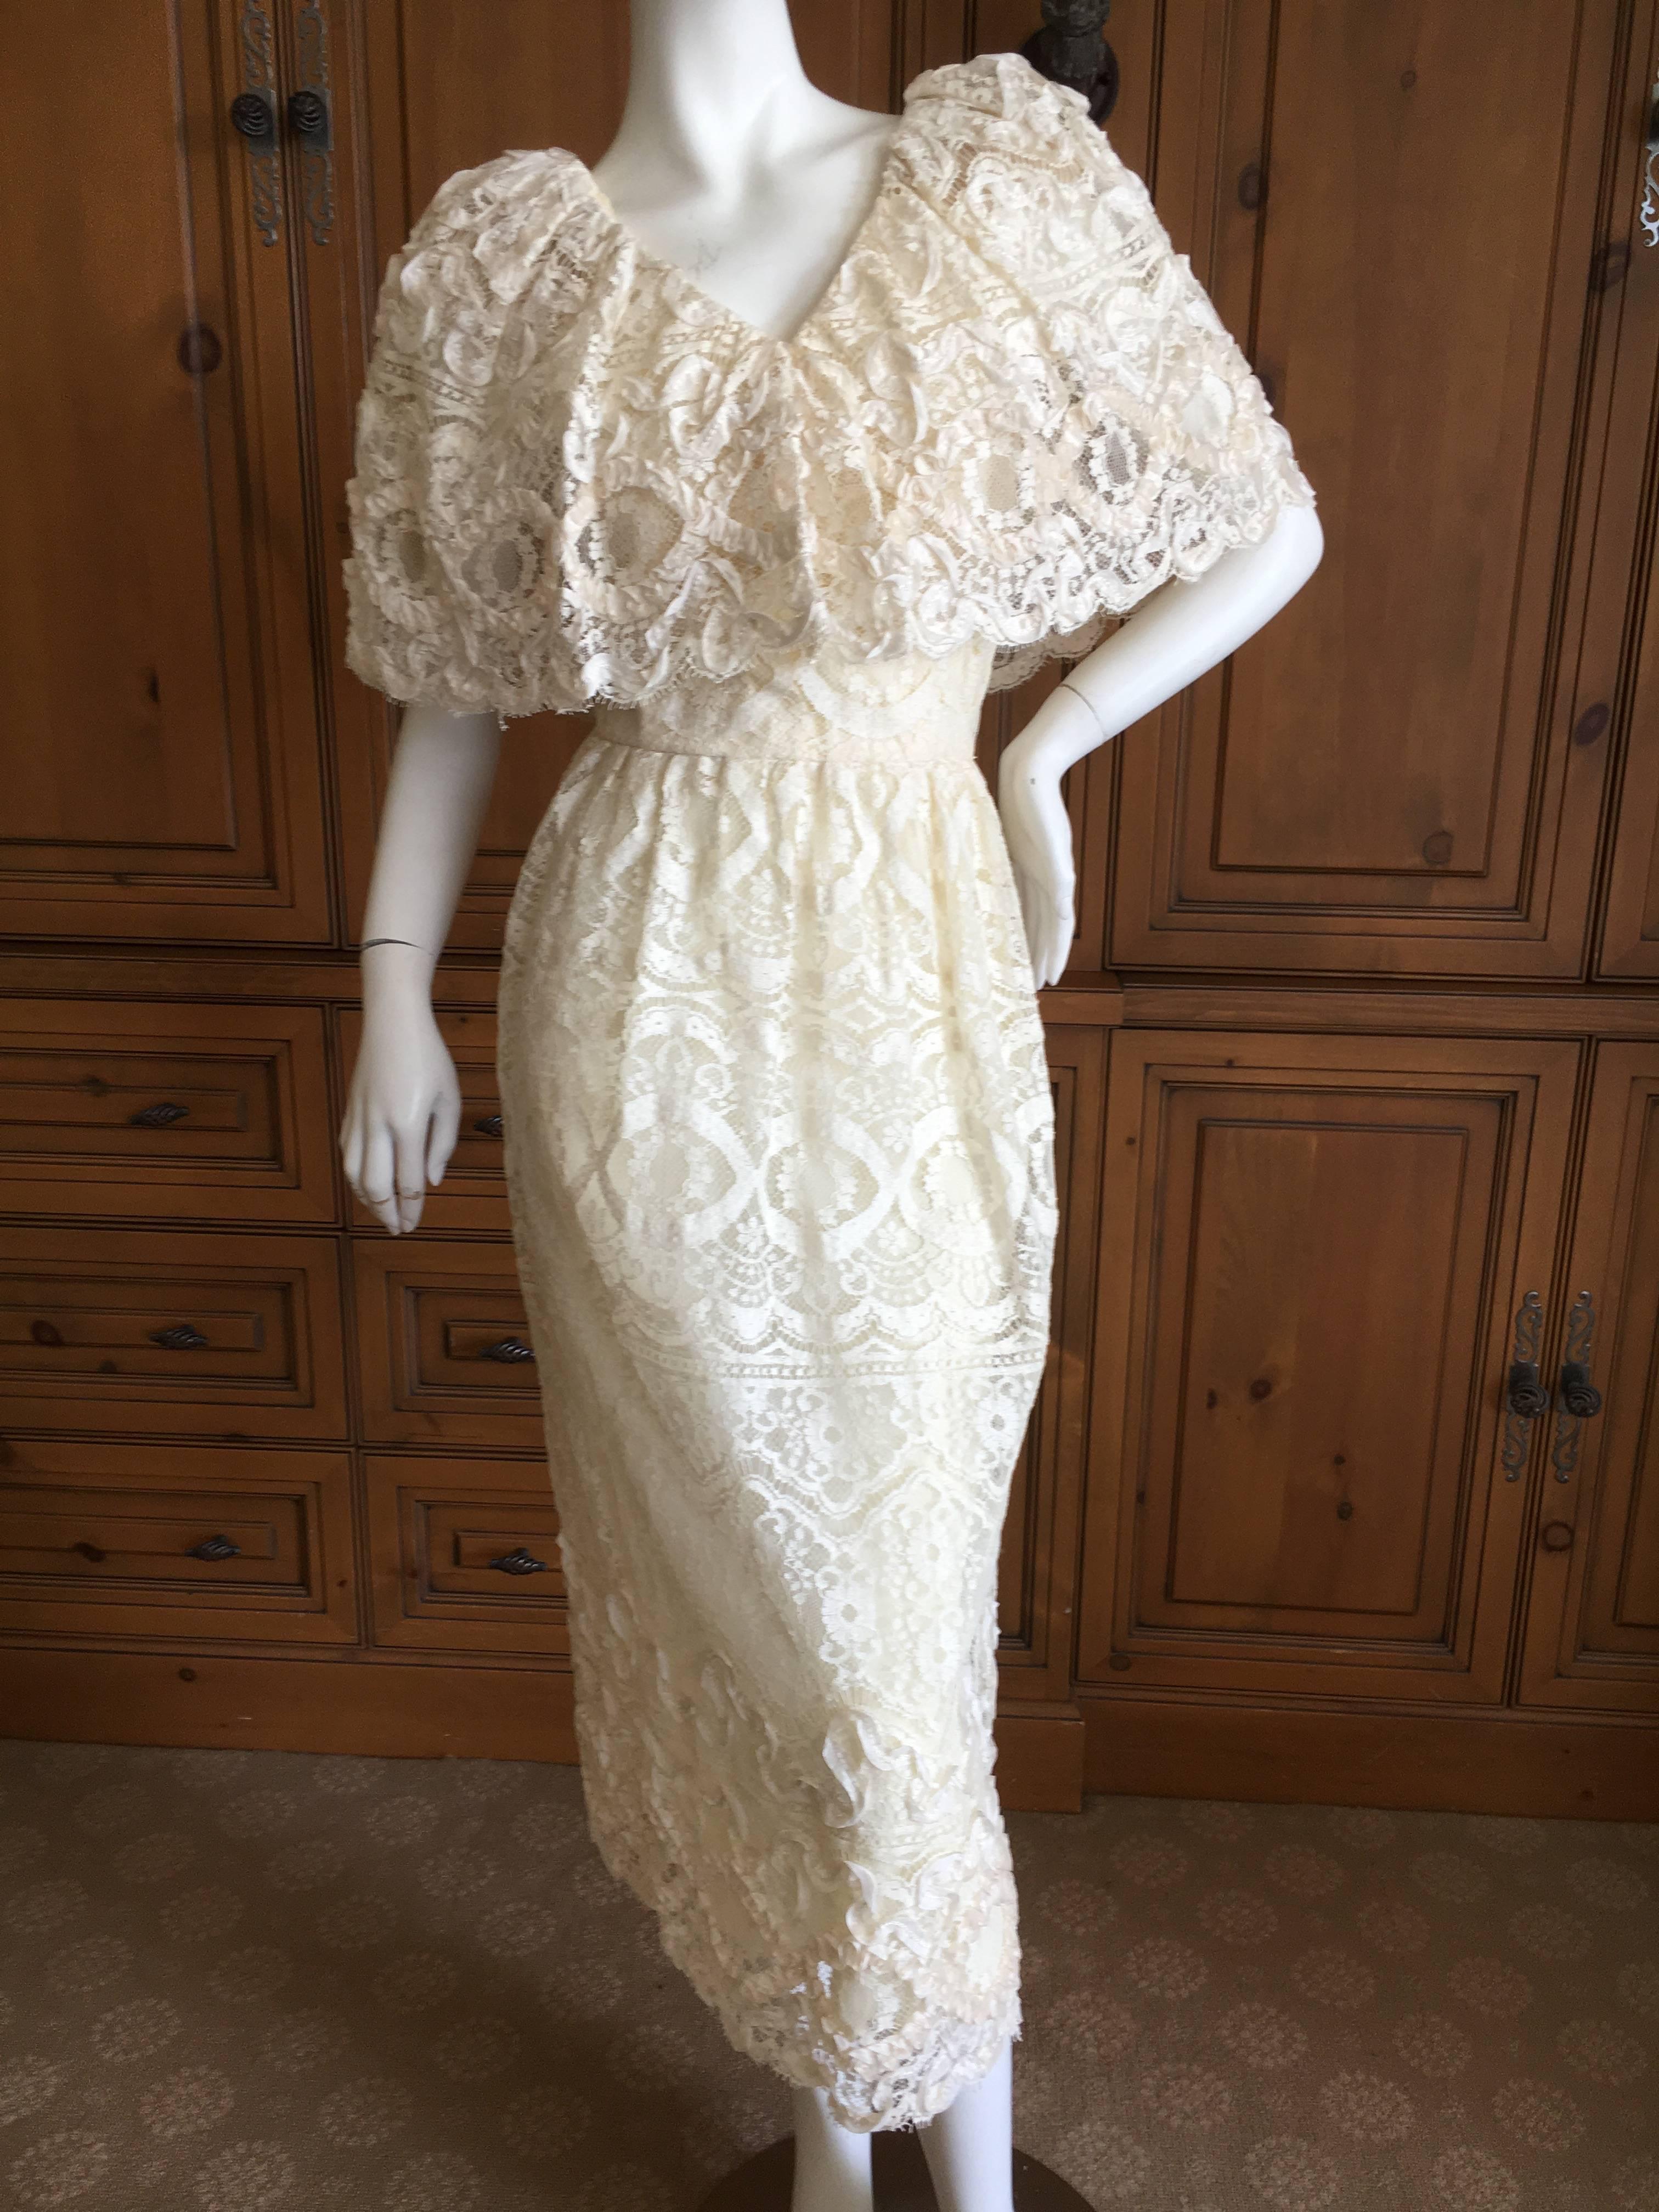 Lovely cream lace dress with a wide cape collar from Morton Myles.
This would be a lovely wedding dress
Bust 36